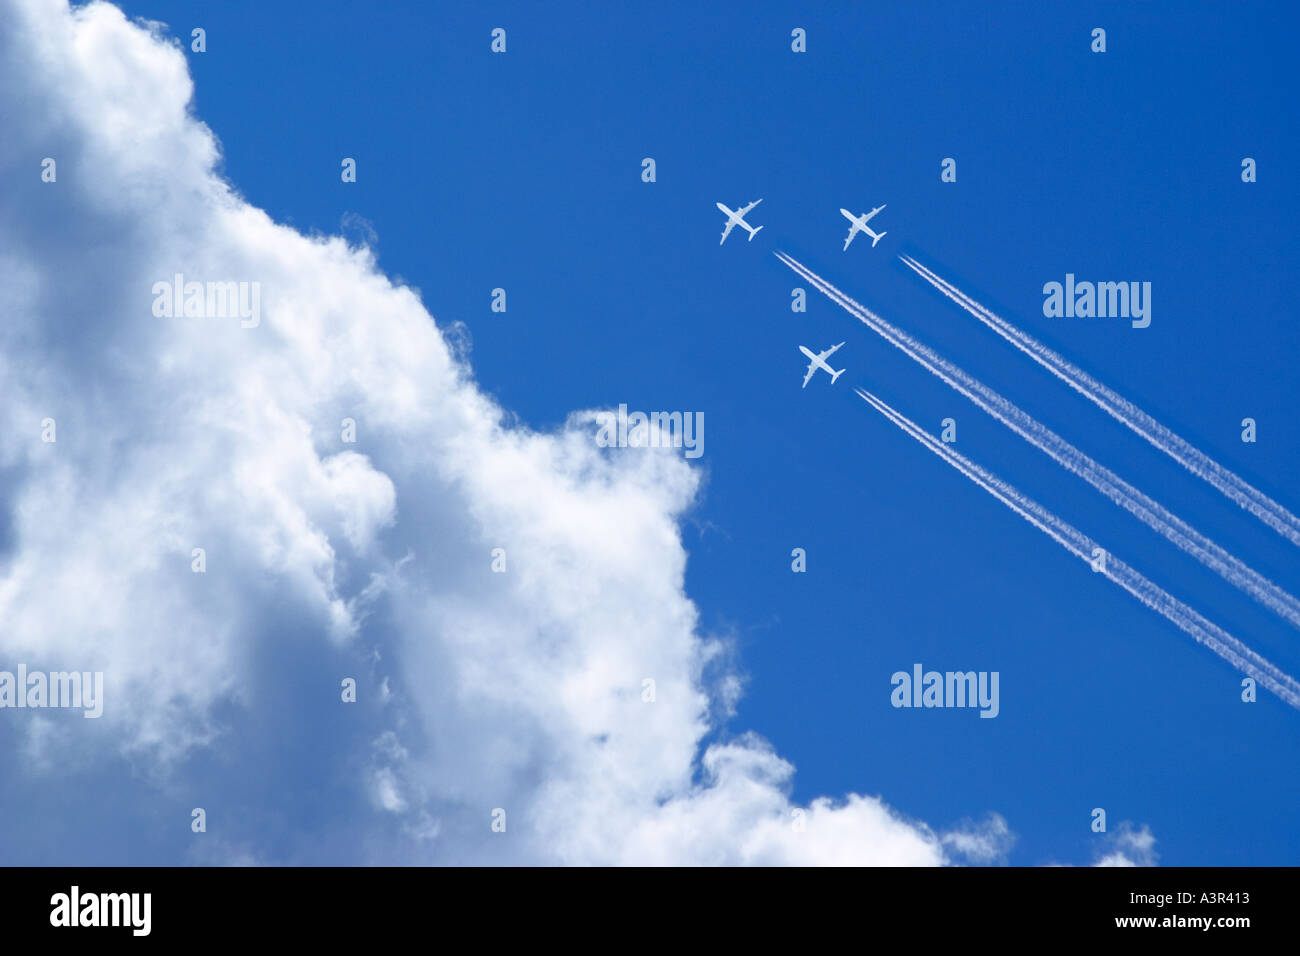 three white passenger airplanes with vapor trails in blue sky Stock Photo